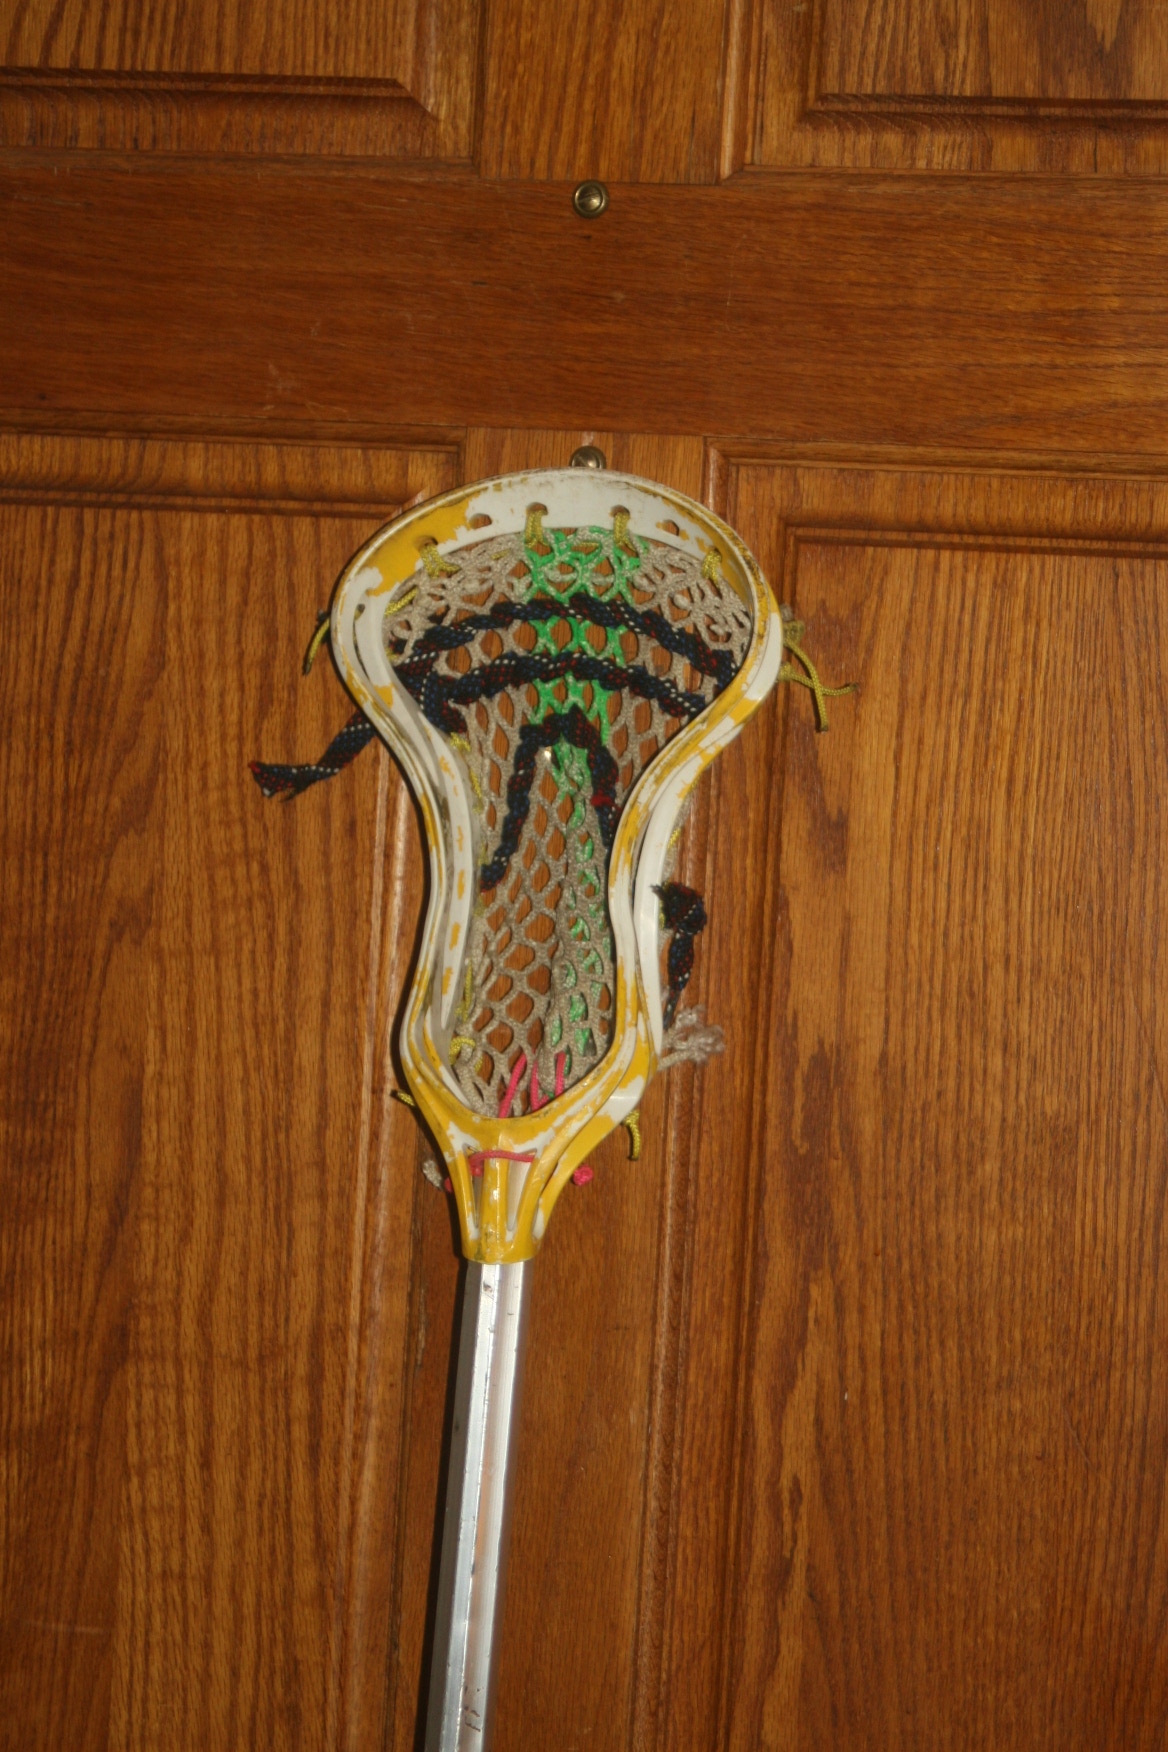 Used Warrior Defensive Lacrosse Stick 61 inches